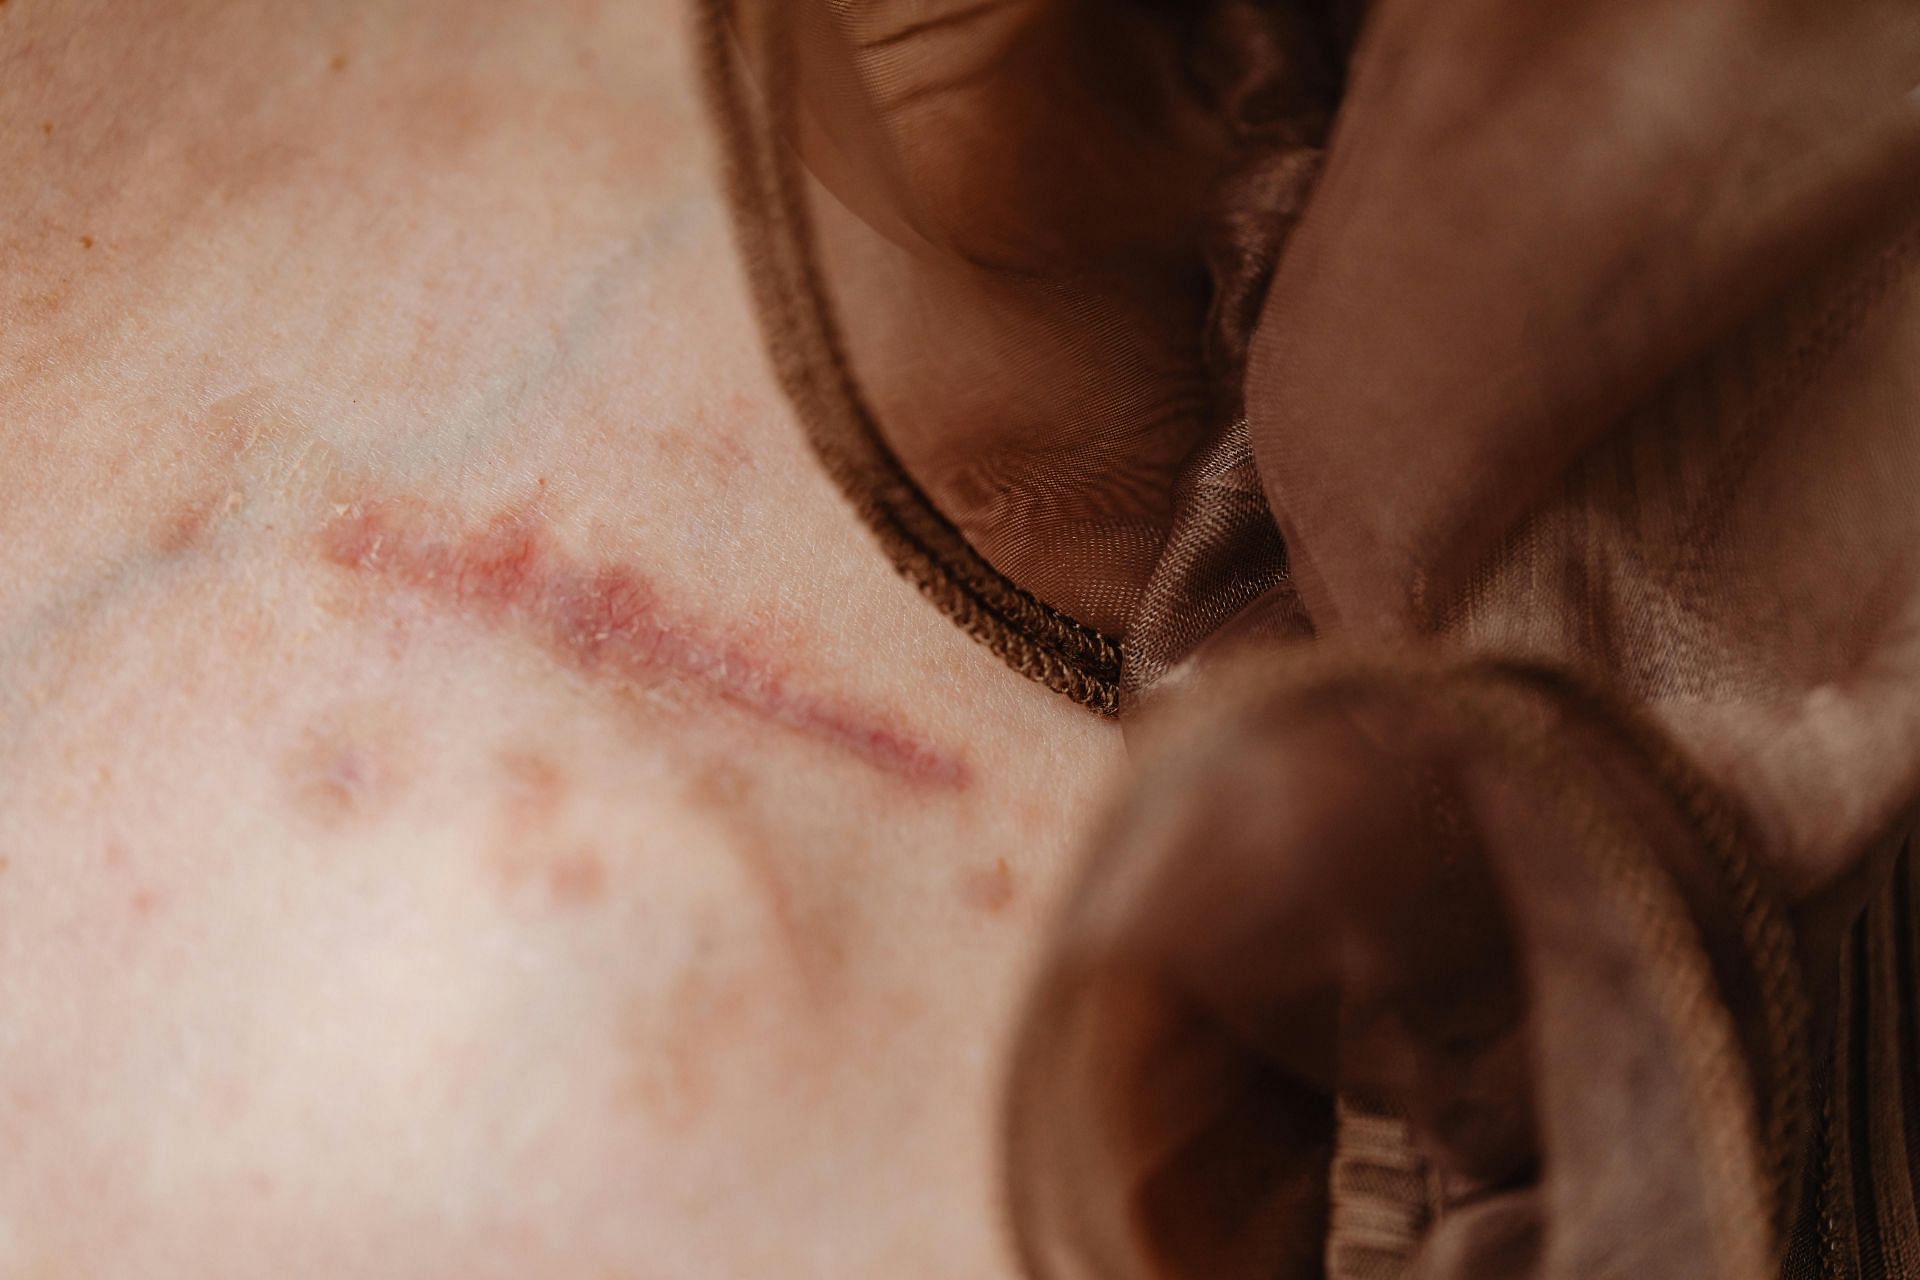 8 tips to reduce scars after surgery(image sourced via Pexels / Photo by karolina)